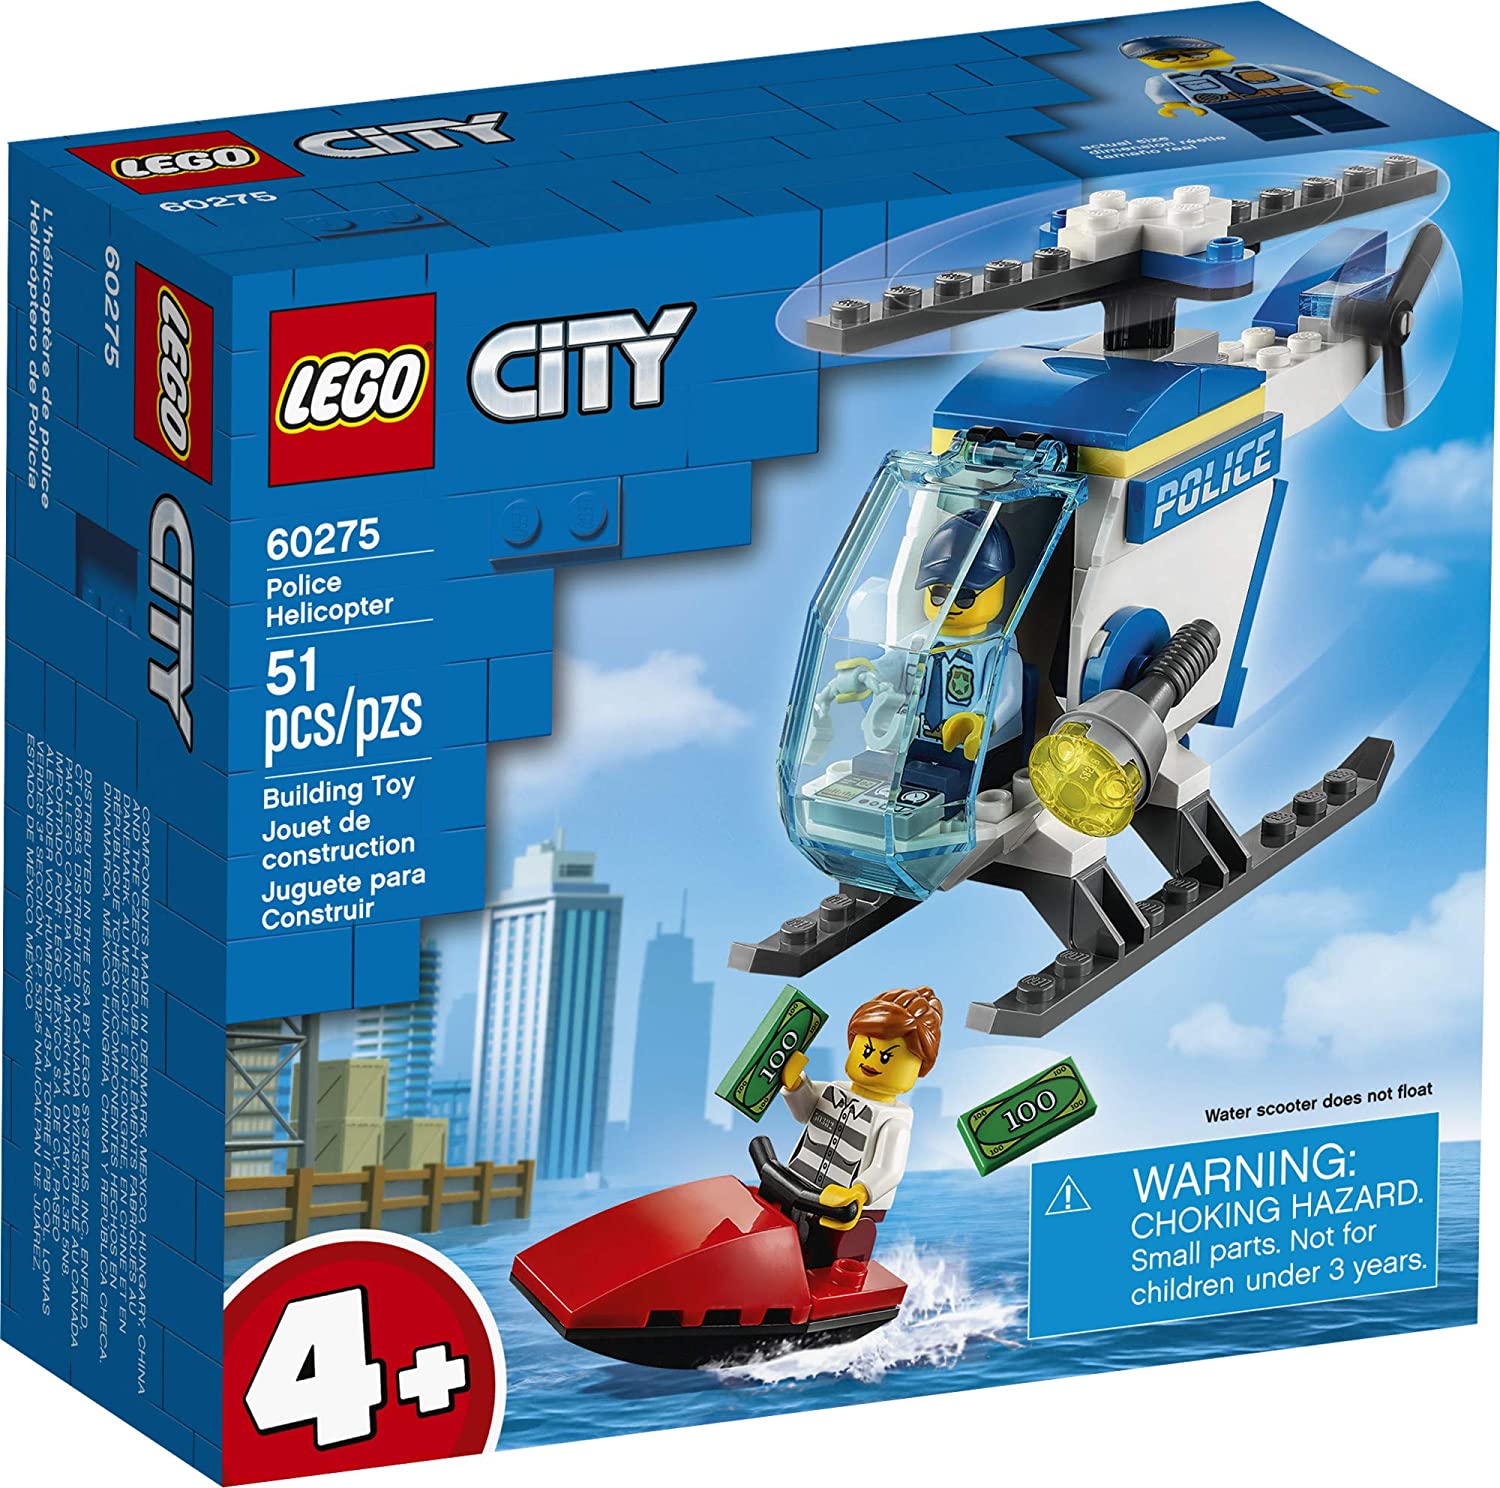 Minachting Laboratorium milieu City Lego Police Helicopter – Awesome Toys Gifts